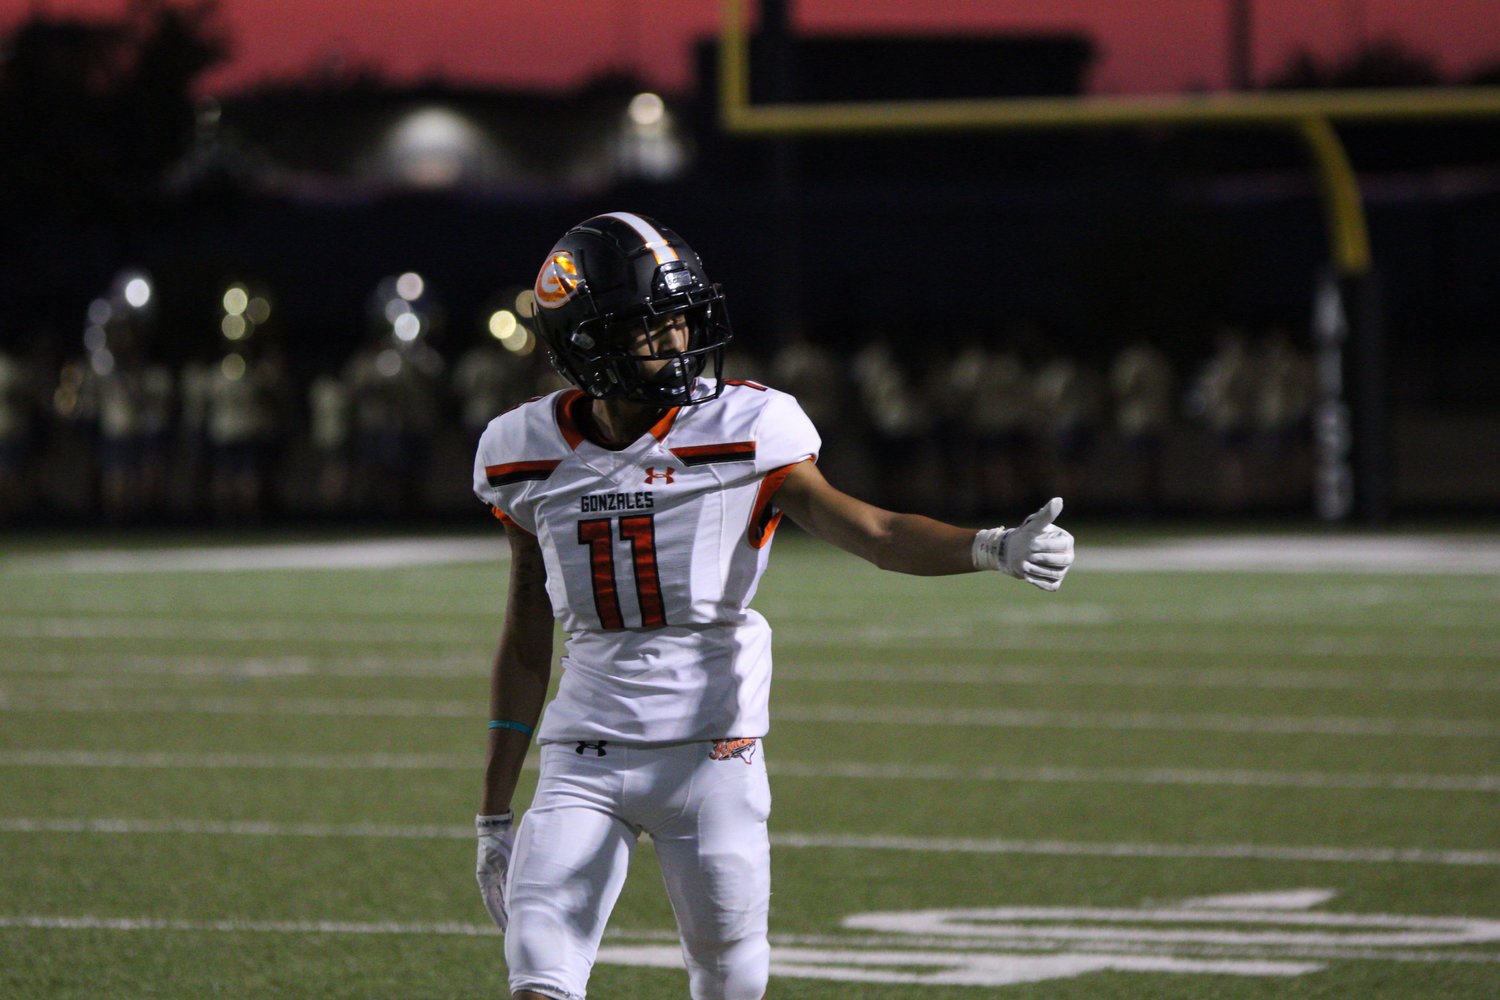 Keisey Ramirez (11) came away with a 14-yard reception in Gonzales' 14-0 victory Friday.